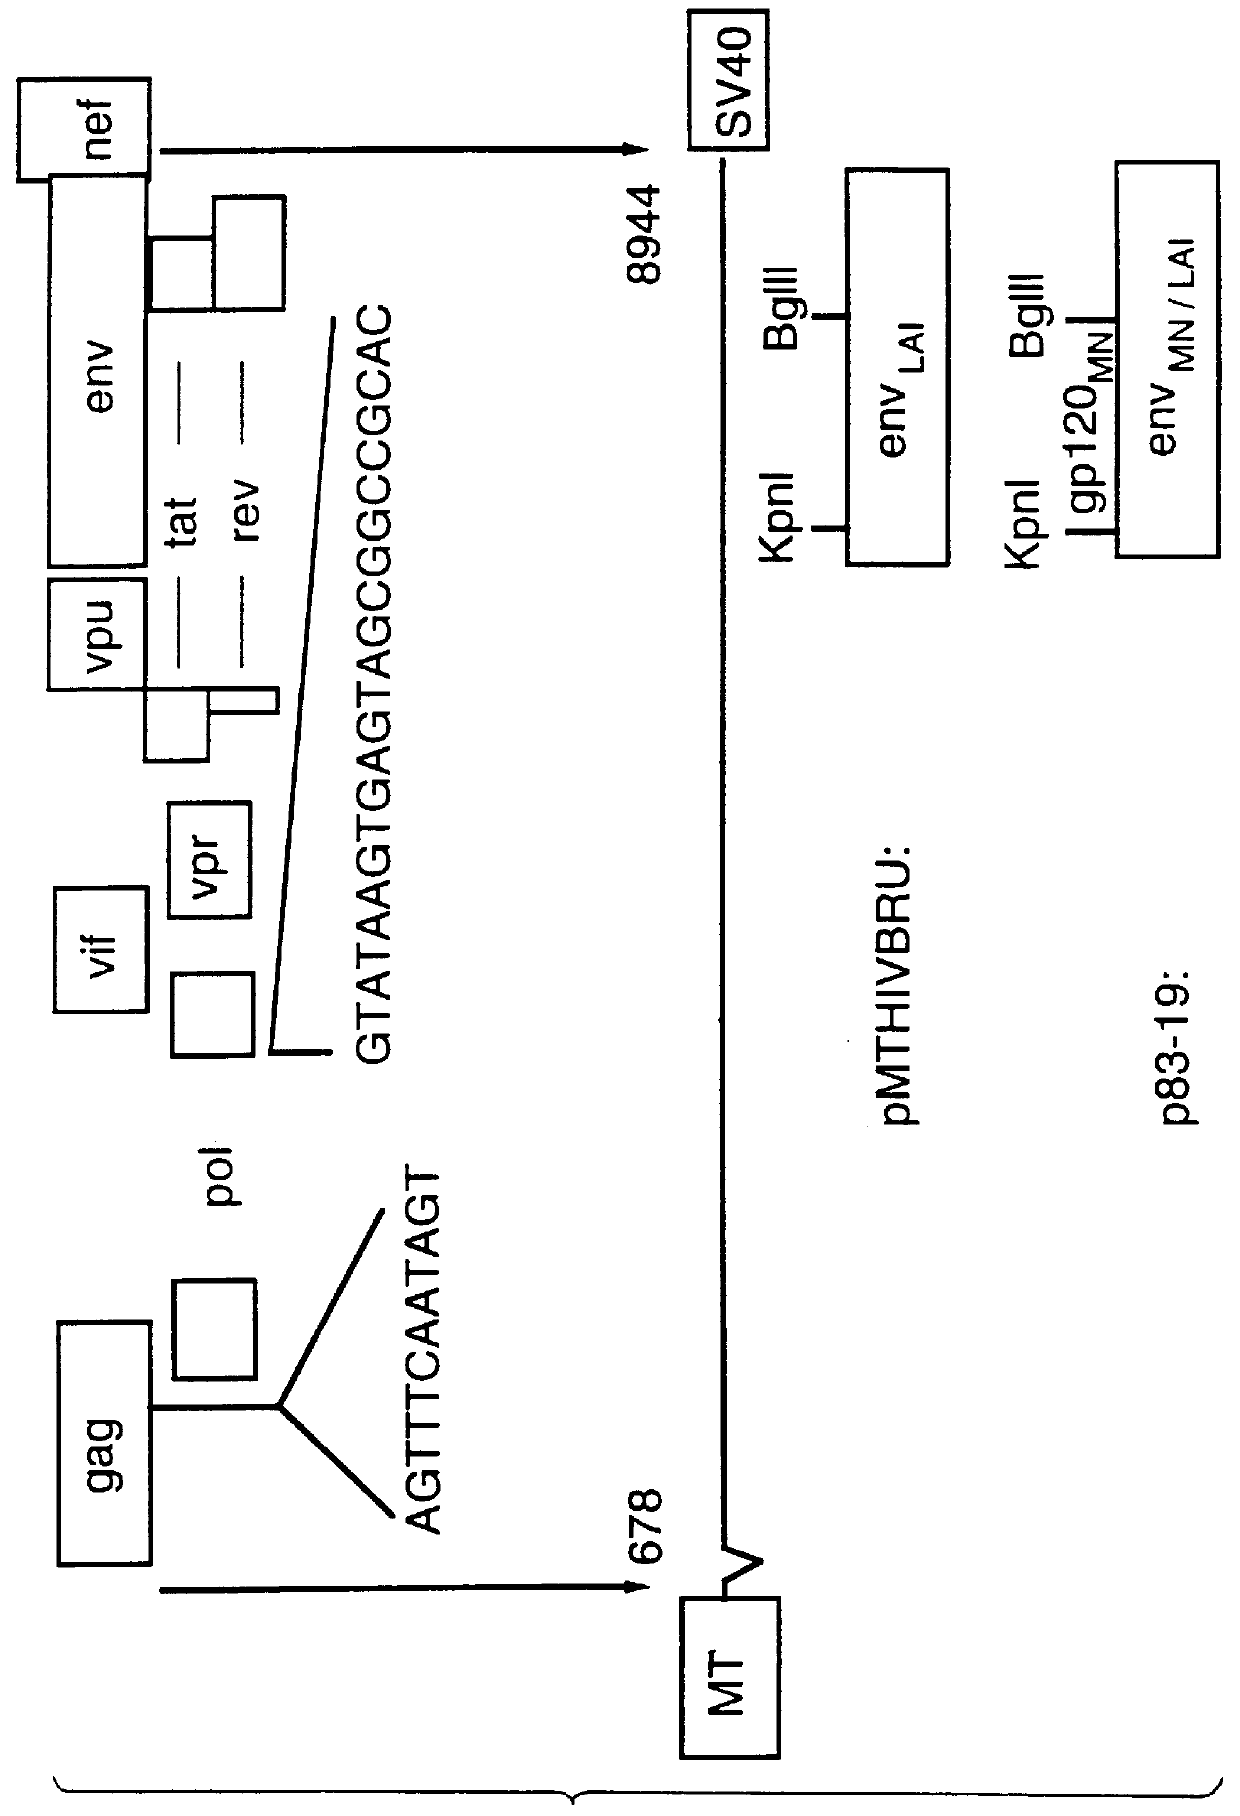 Methods for the detection of HIV-specific immune responses employing non-infectious, non-replicating, HIV retrovirus-like particles containing heterologous antigenic markers